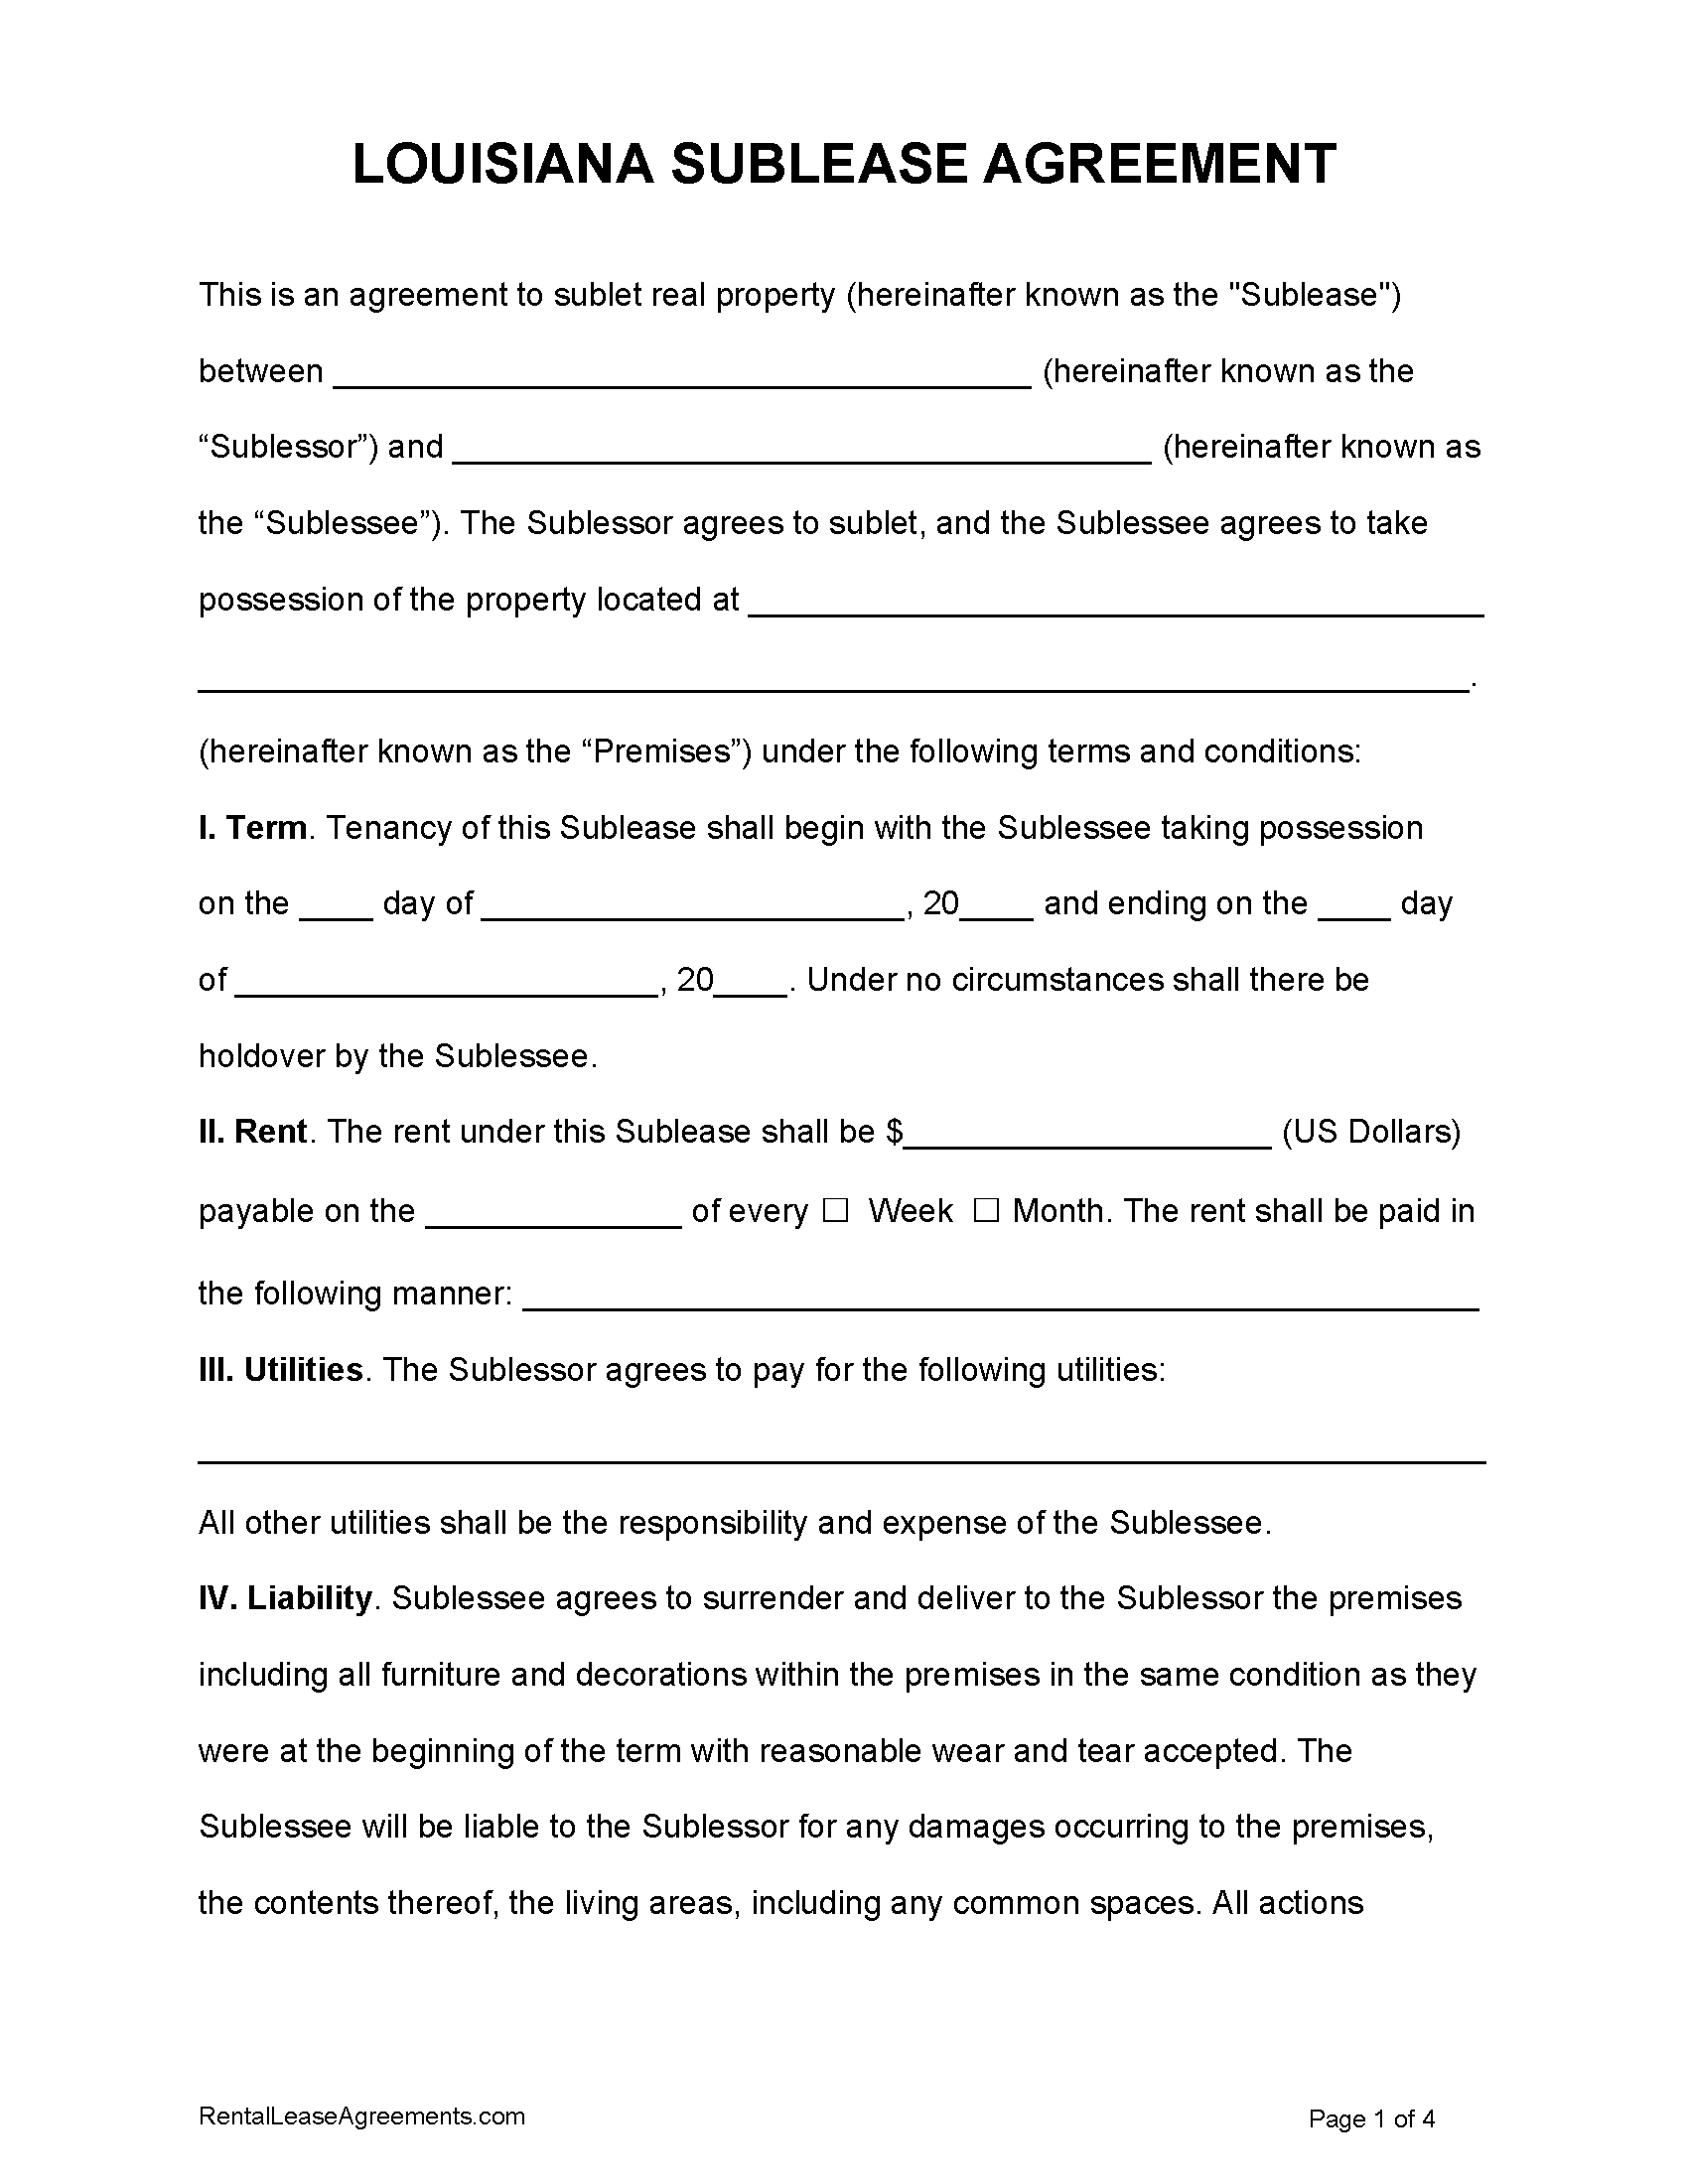 louisiana-sublease-agreement-pdf-ms-word-free-printable-rental-lease-agreement-templates